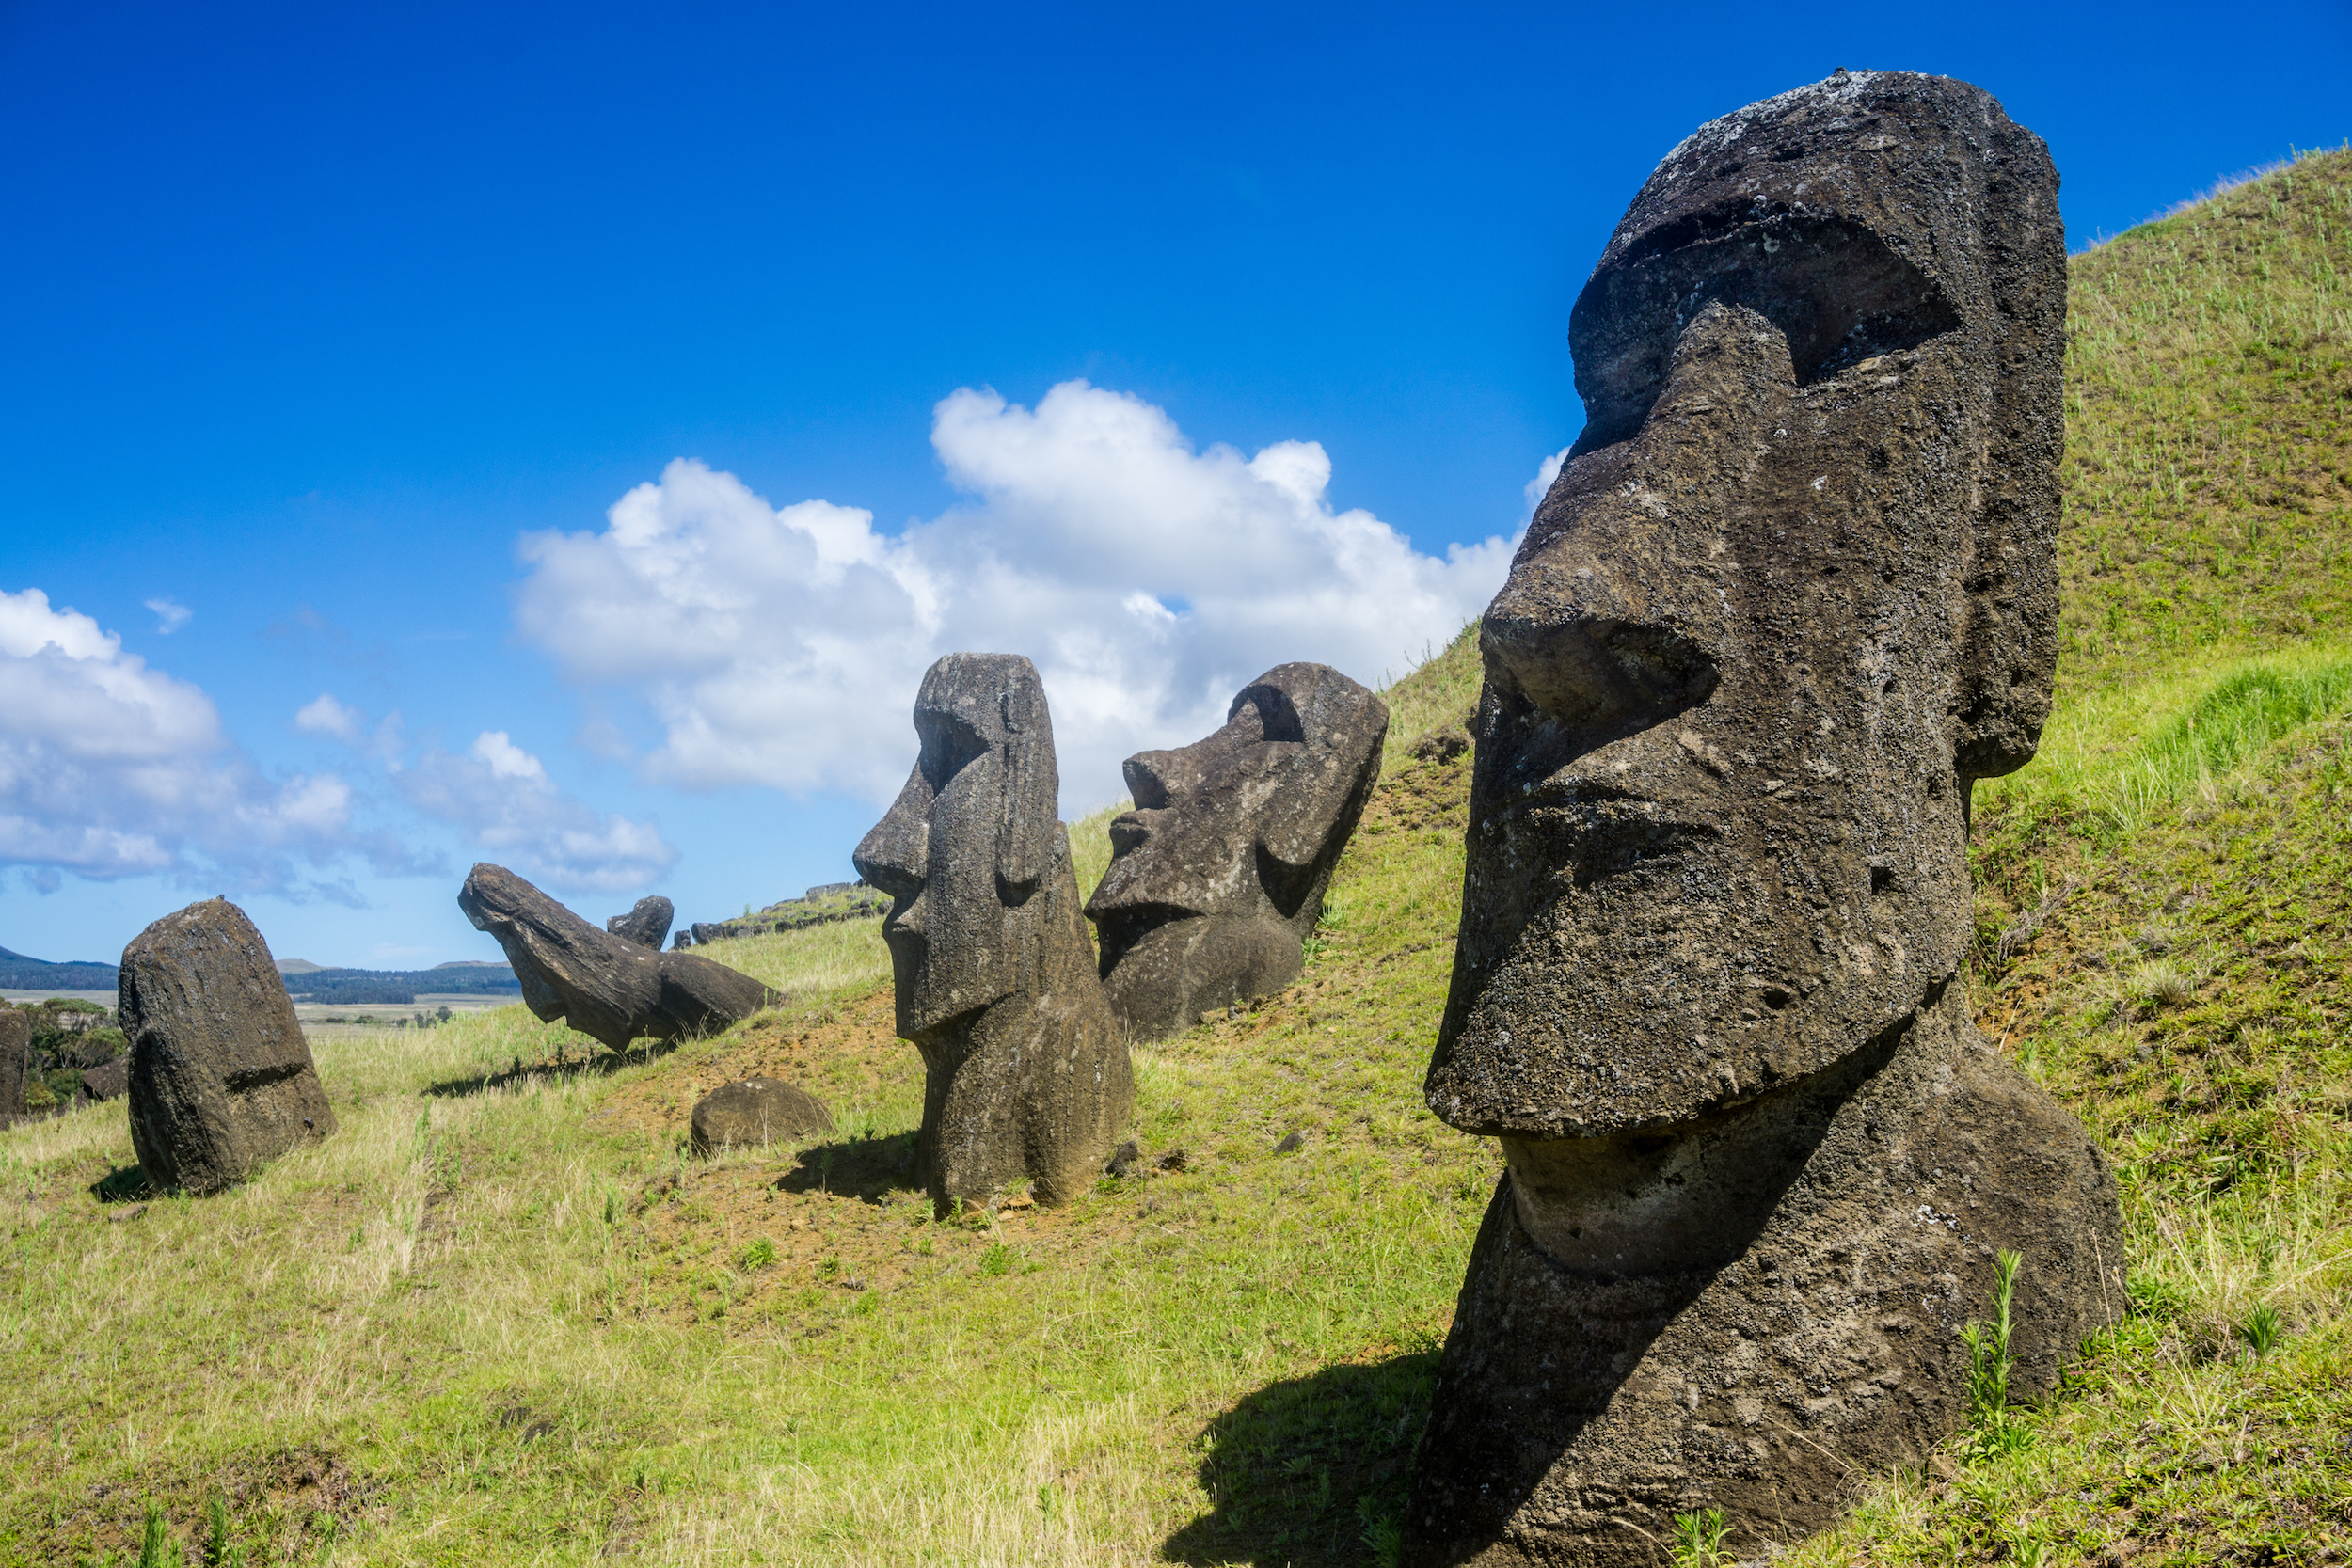 Man Slams Truck Into Easter Island Statue Causing Incalculable